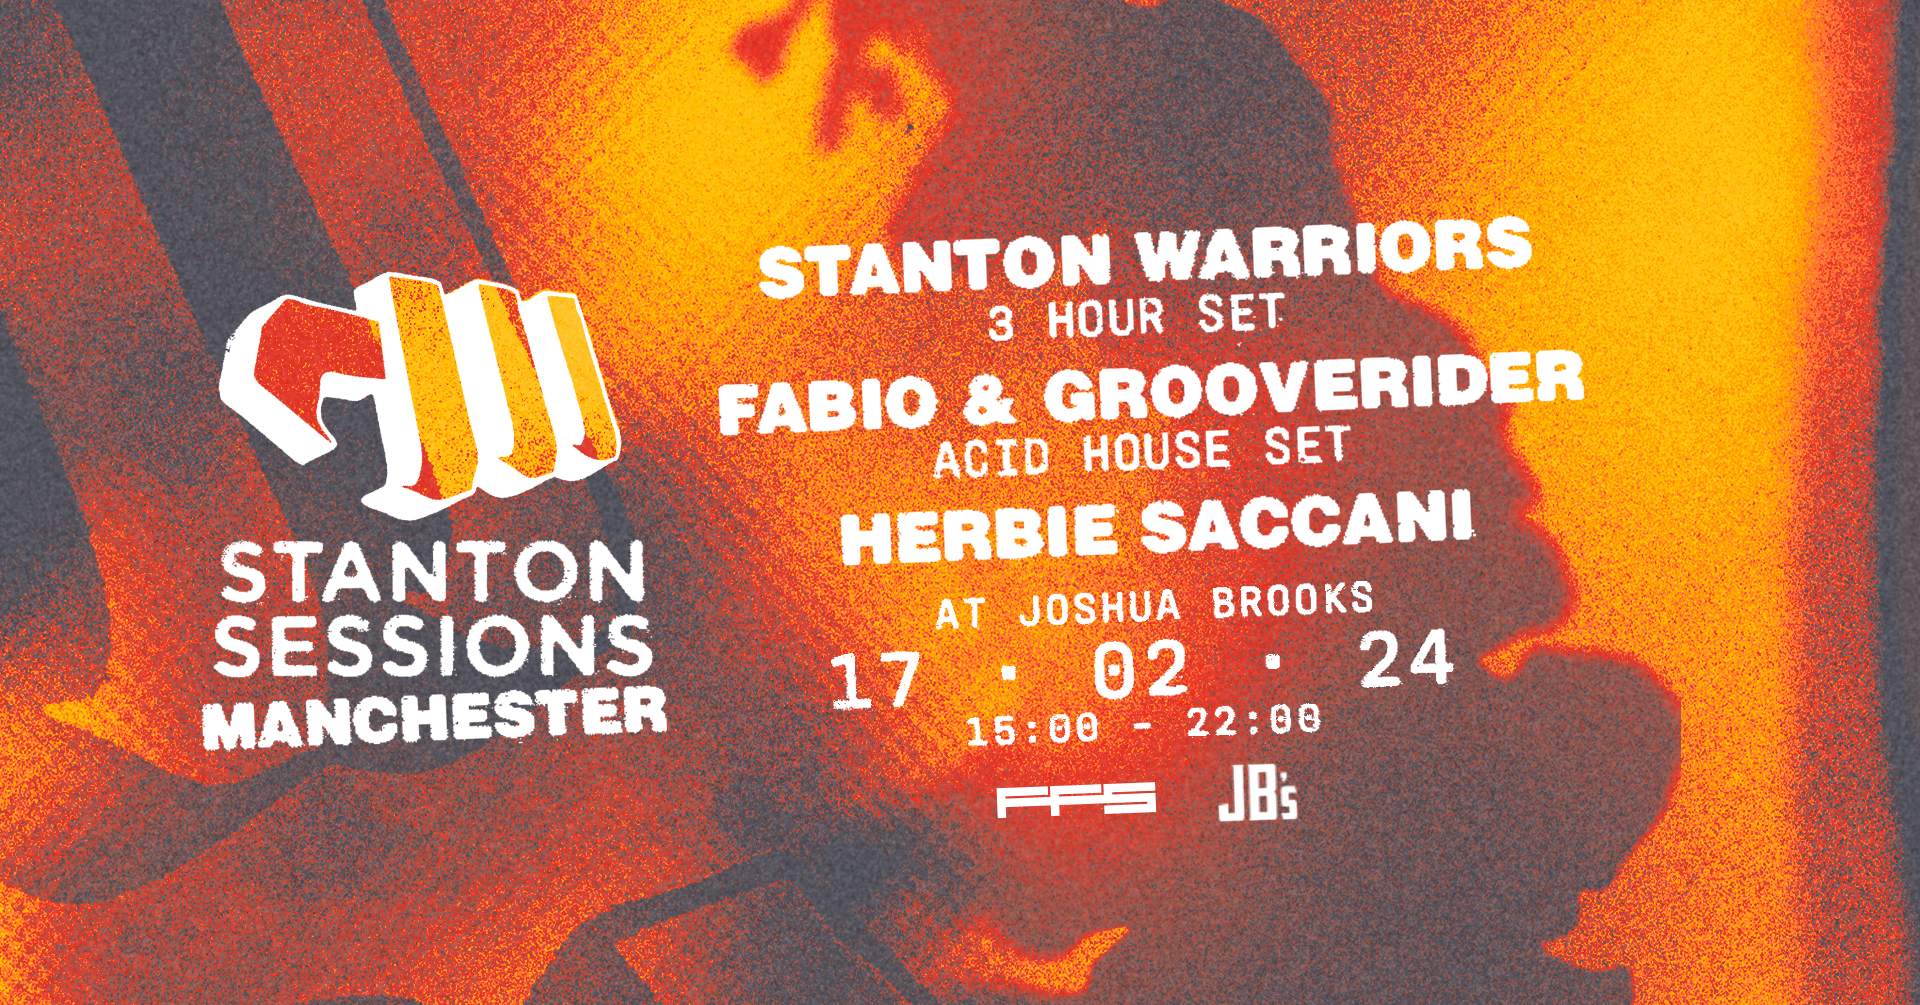 Stanton Sessions - Manchester - フライヤー表